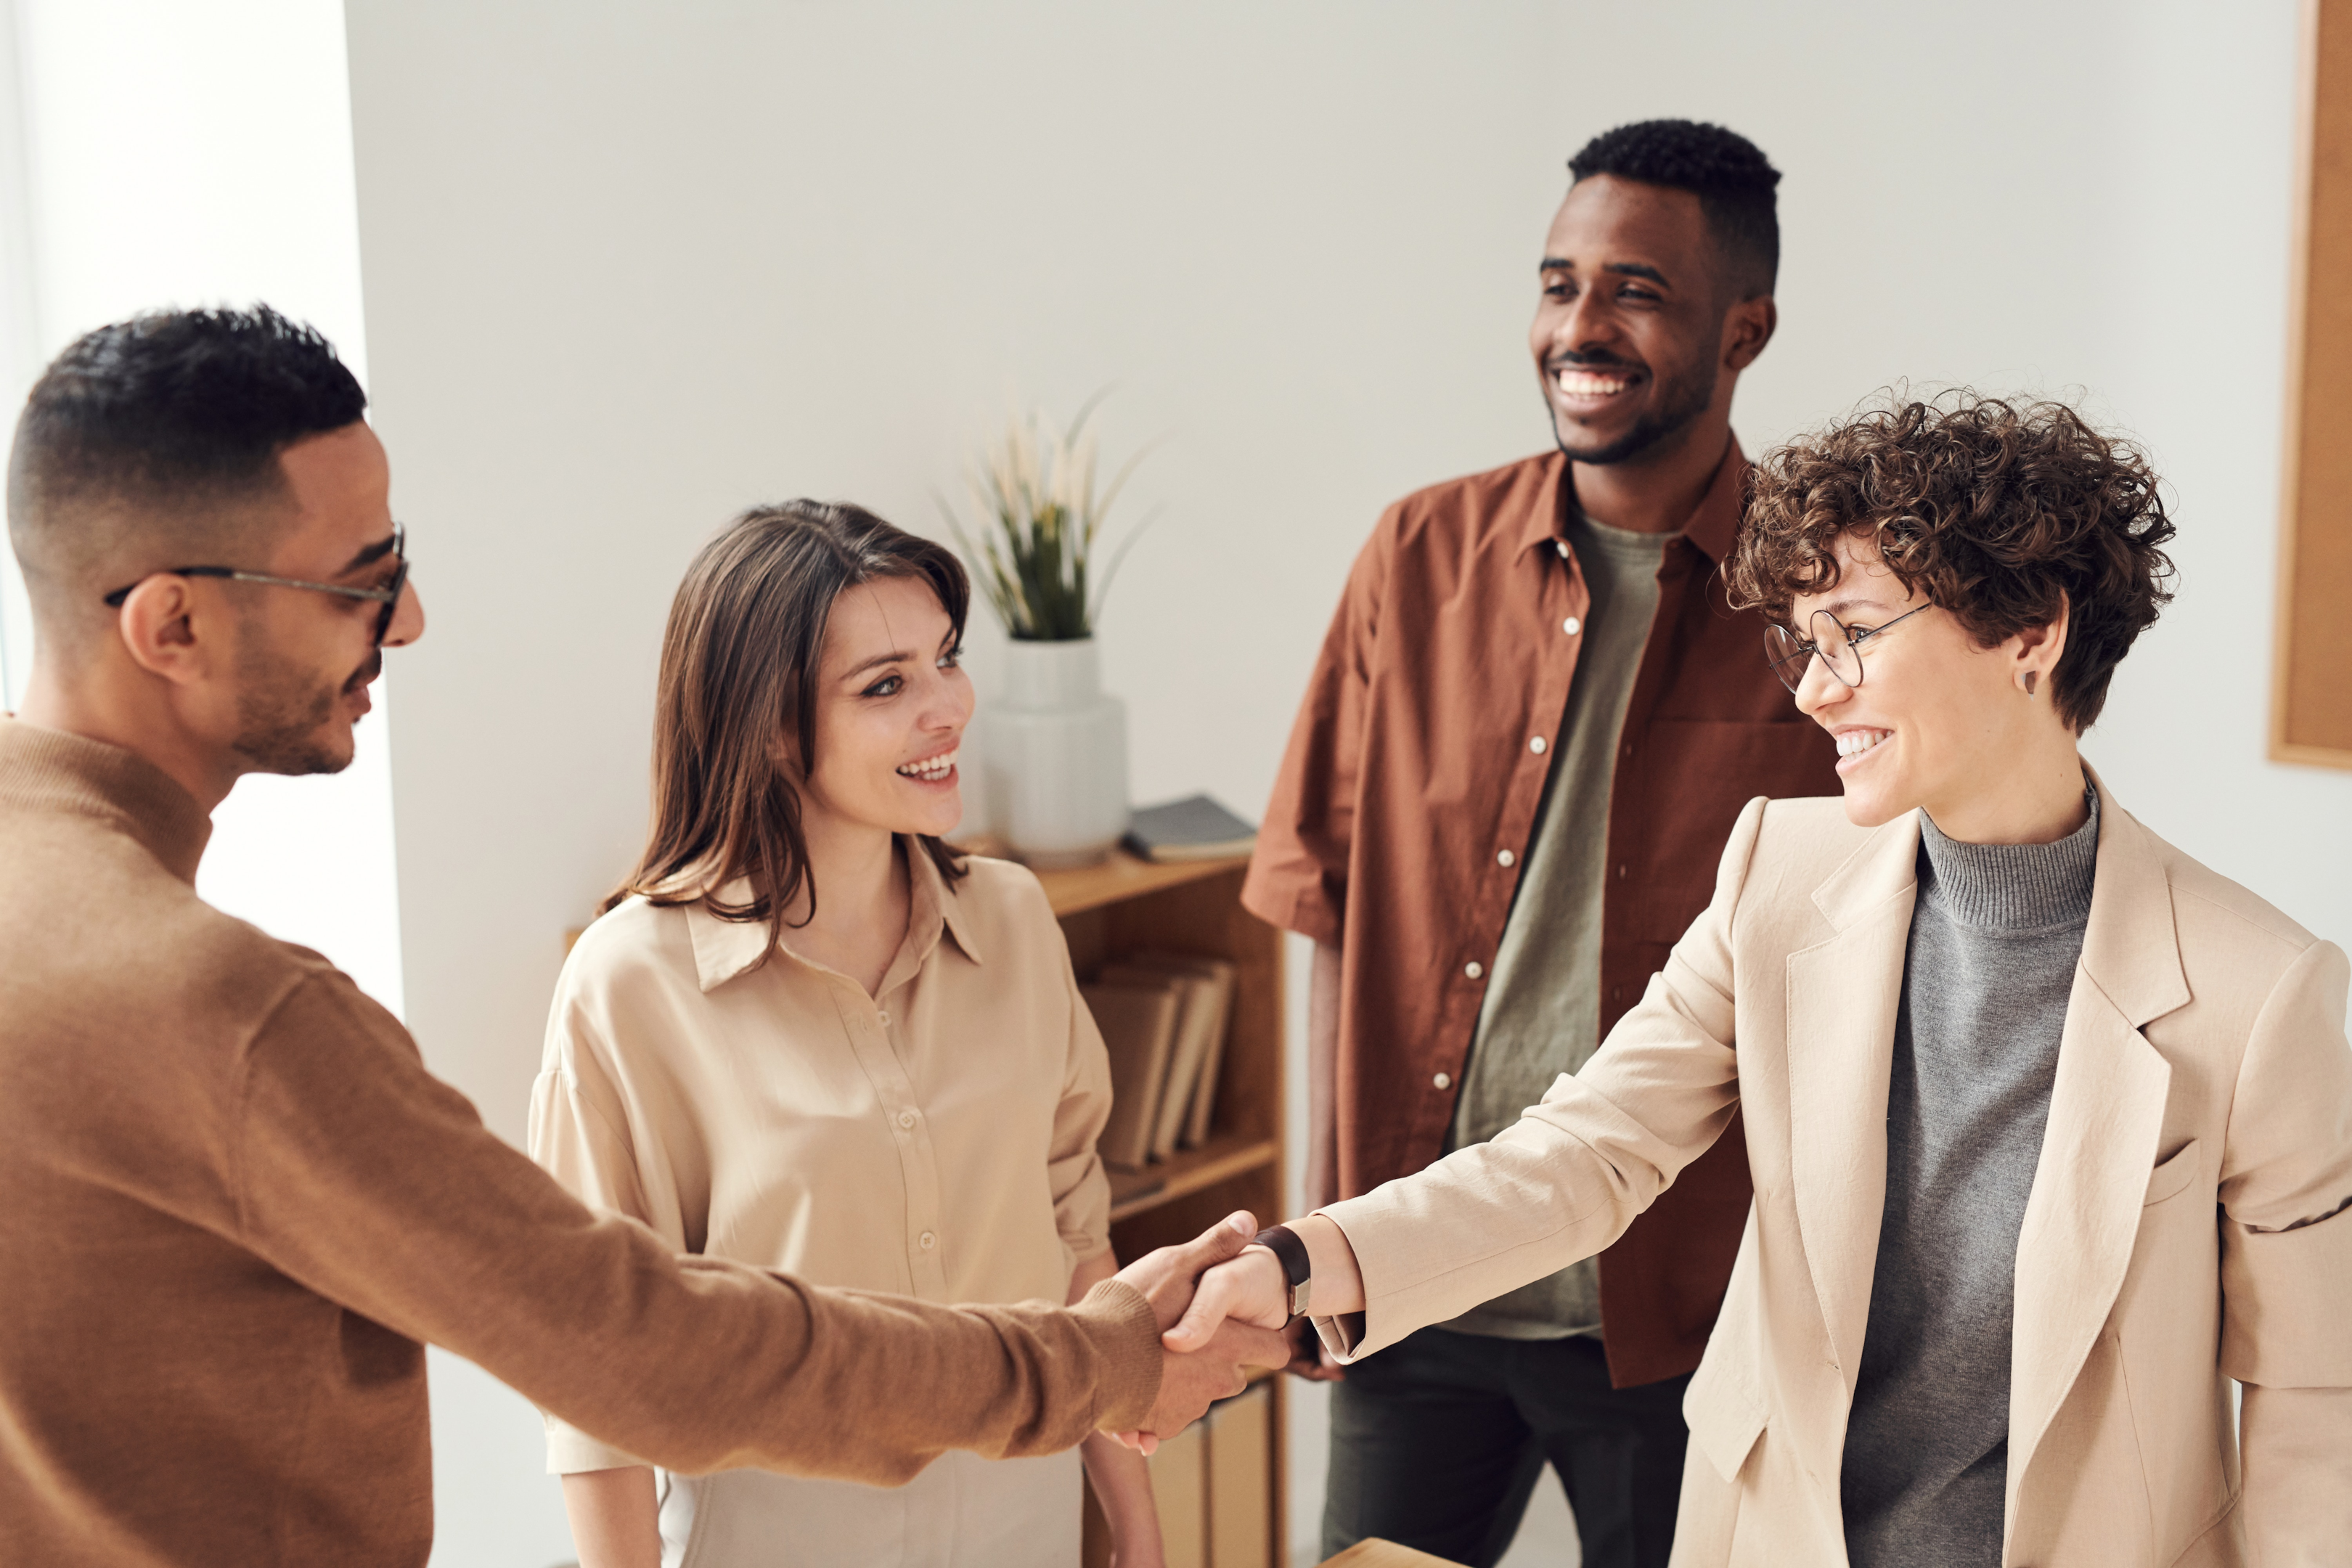 Making a good first impression can make or break the potential connection with a client | Photo by fauxels from Pexels